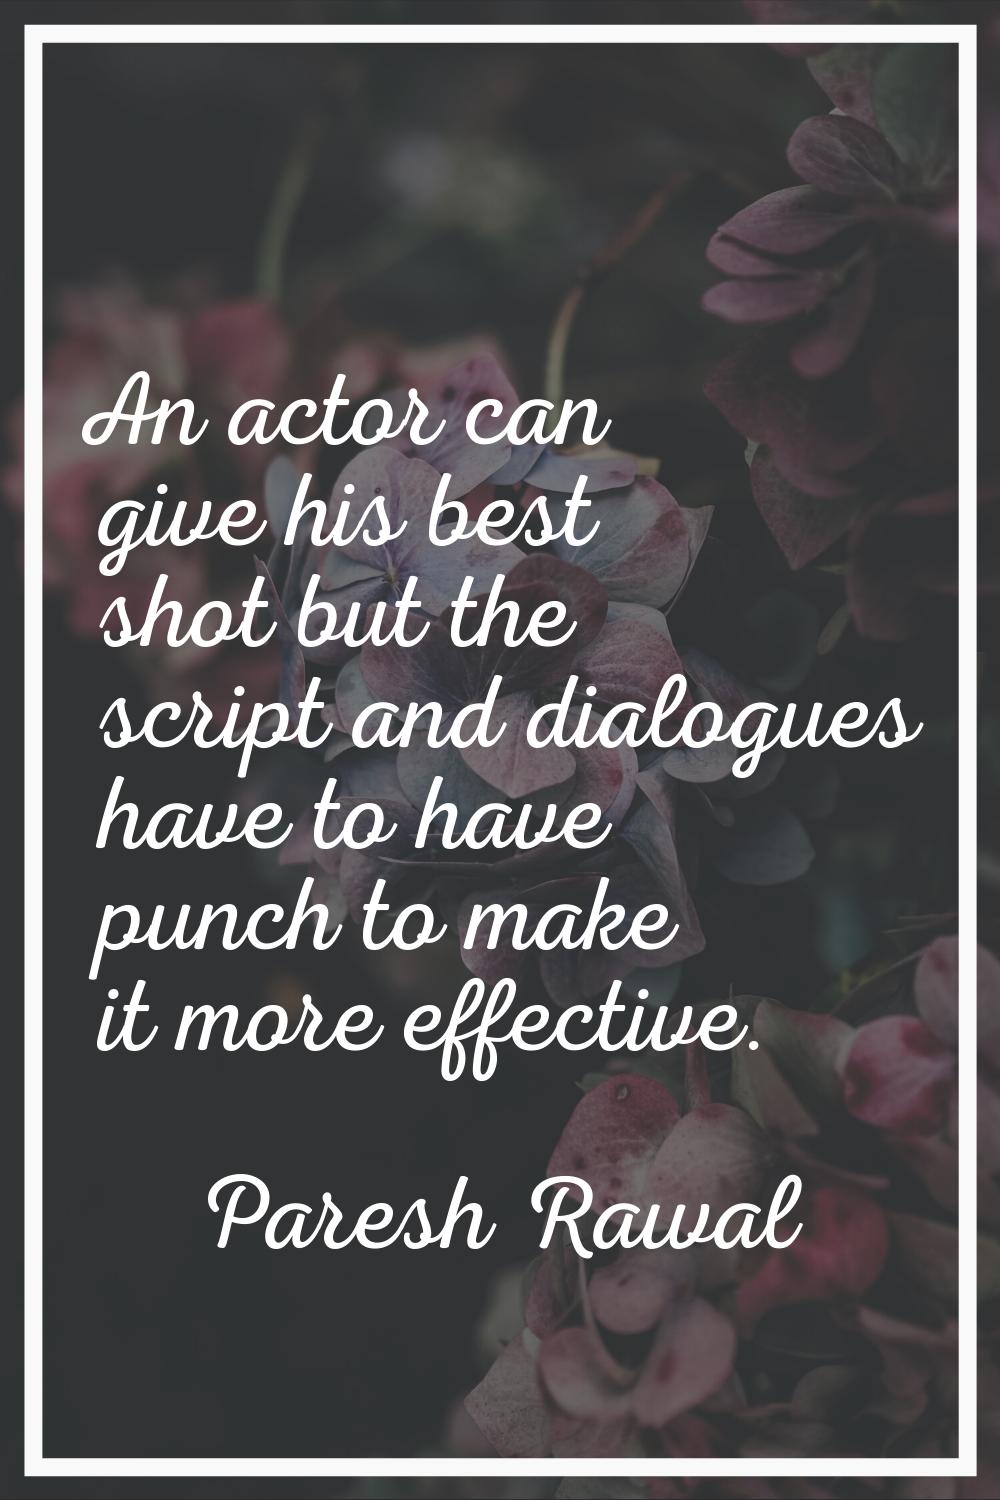 An actor can give his best shot but the script and dialogues have to have punch to make it more eff